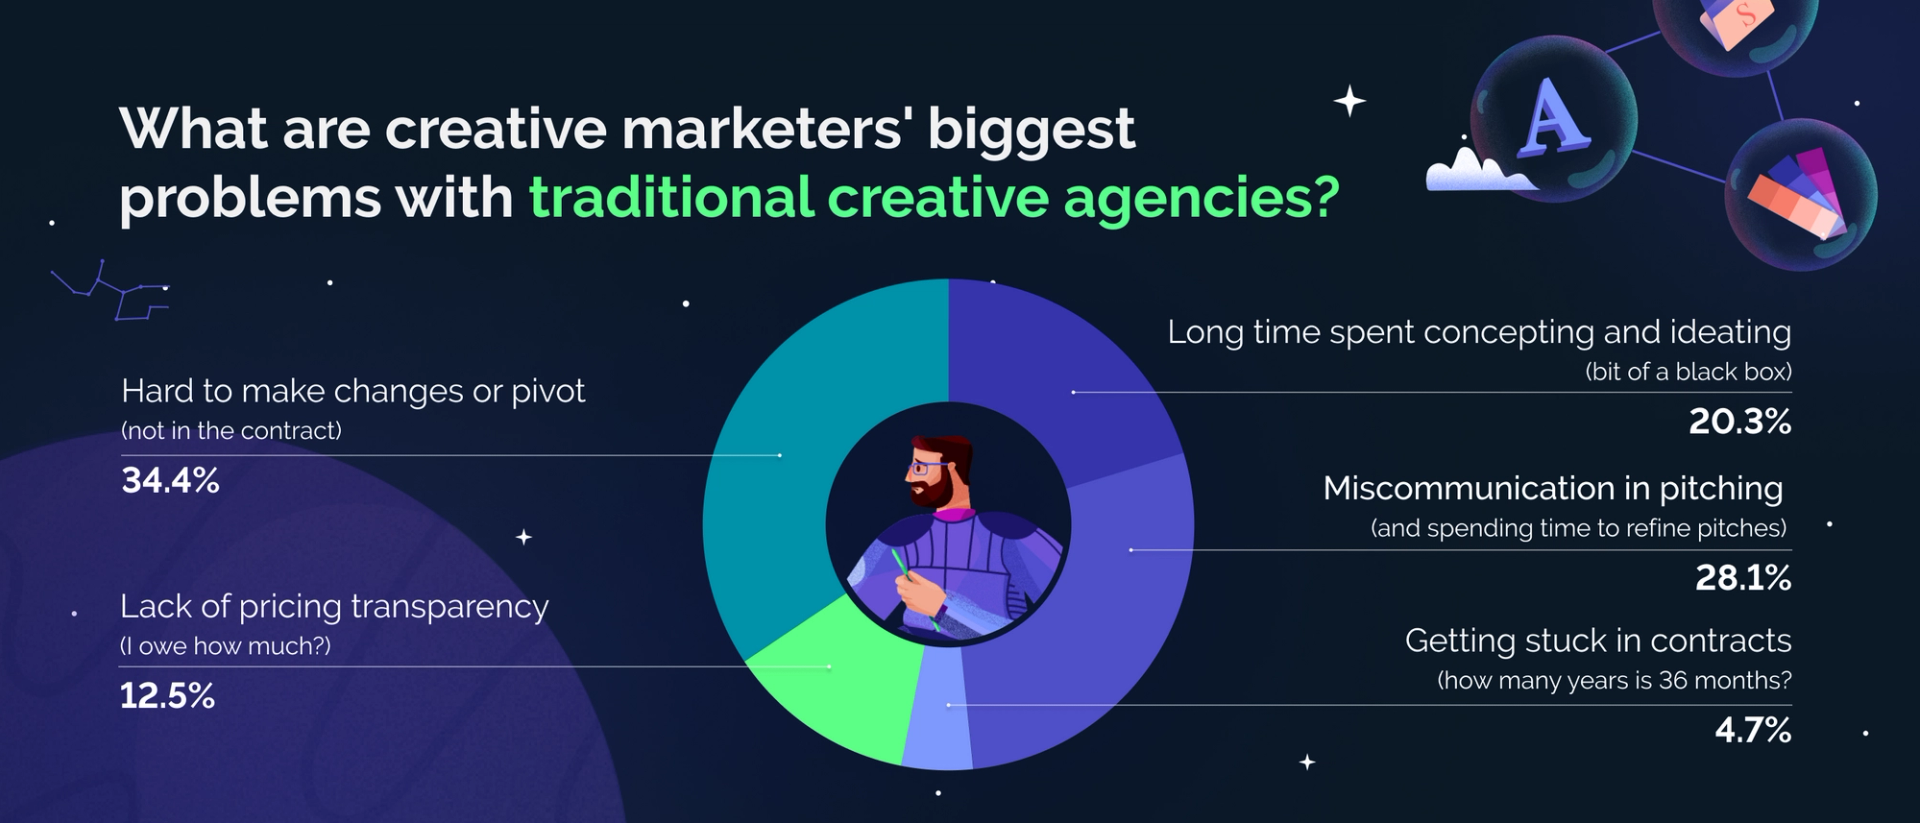 Infographic: The biggest problems with traditional creative agencies. The top answer (34.4%) was that it's hard to make changes or pivot.